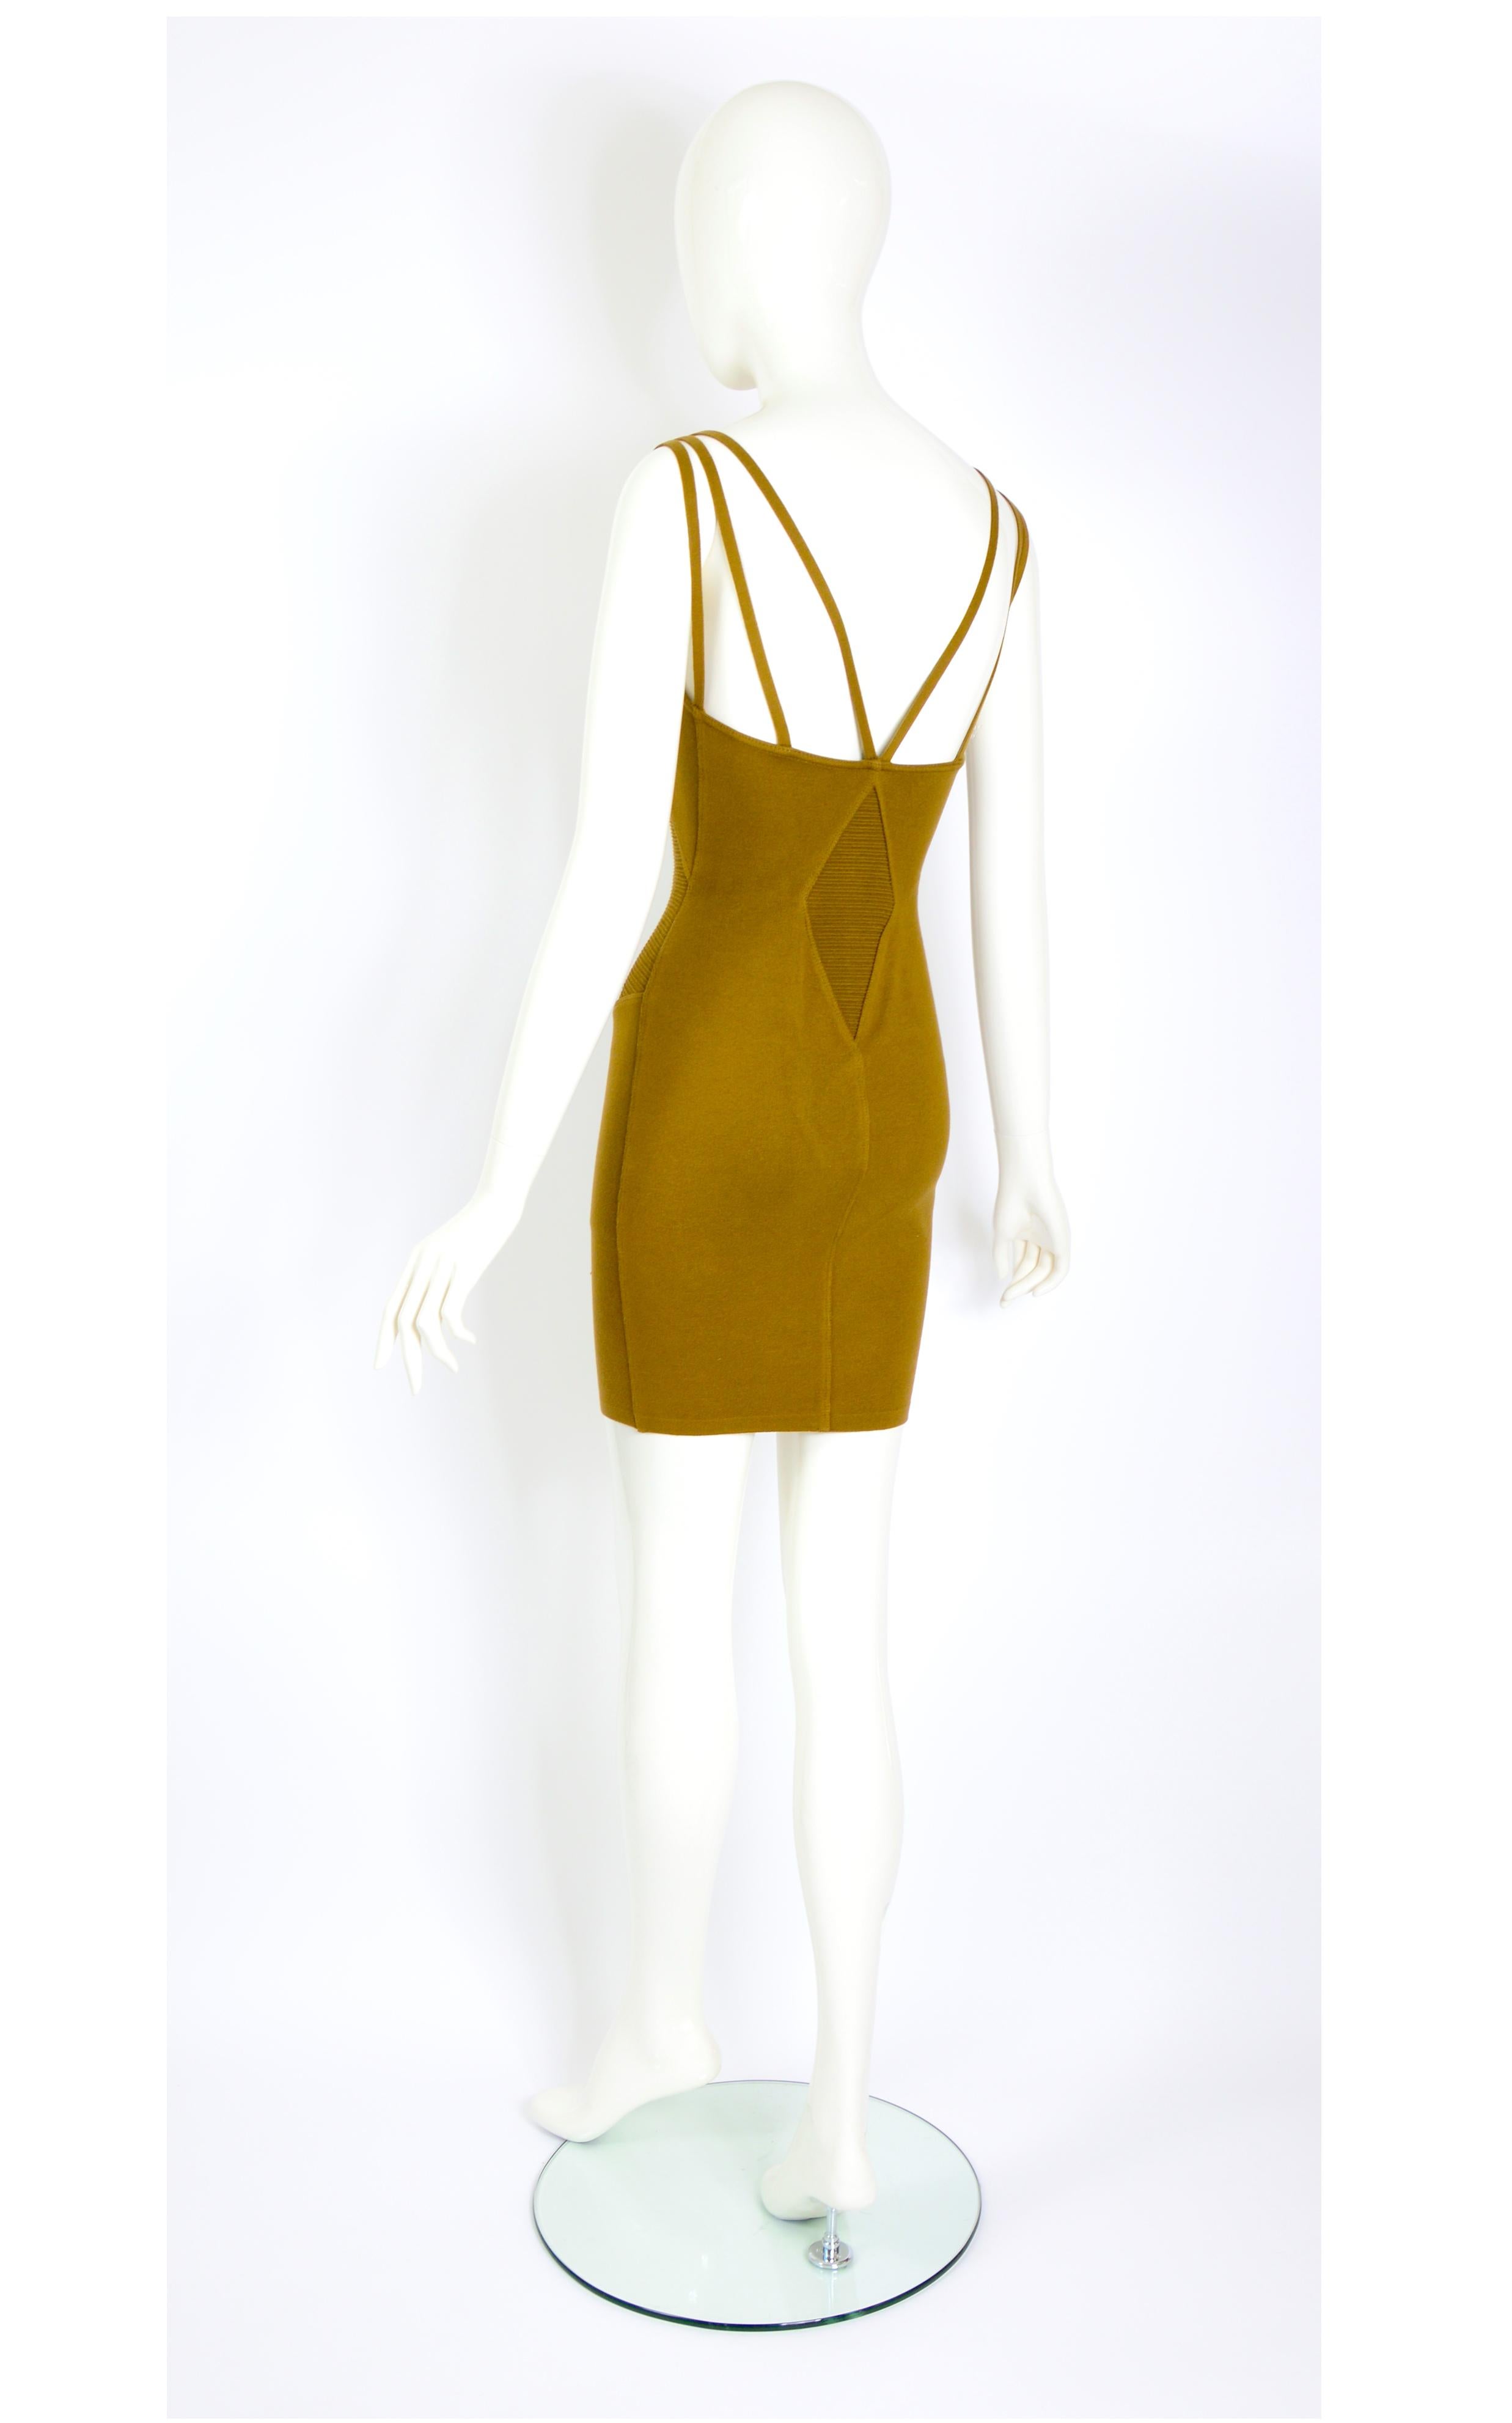 Alaïa by Azzedine Alaïa spring 1990 runway collection textured bodycon dress In Excellent Condition For Sale In Antwerp, BE